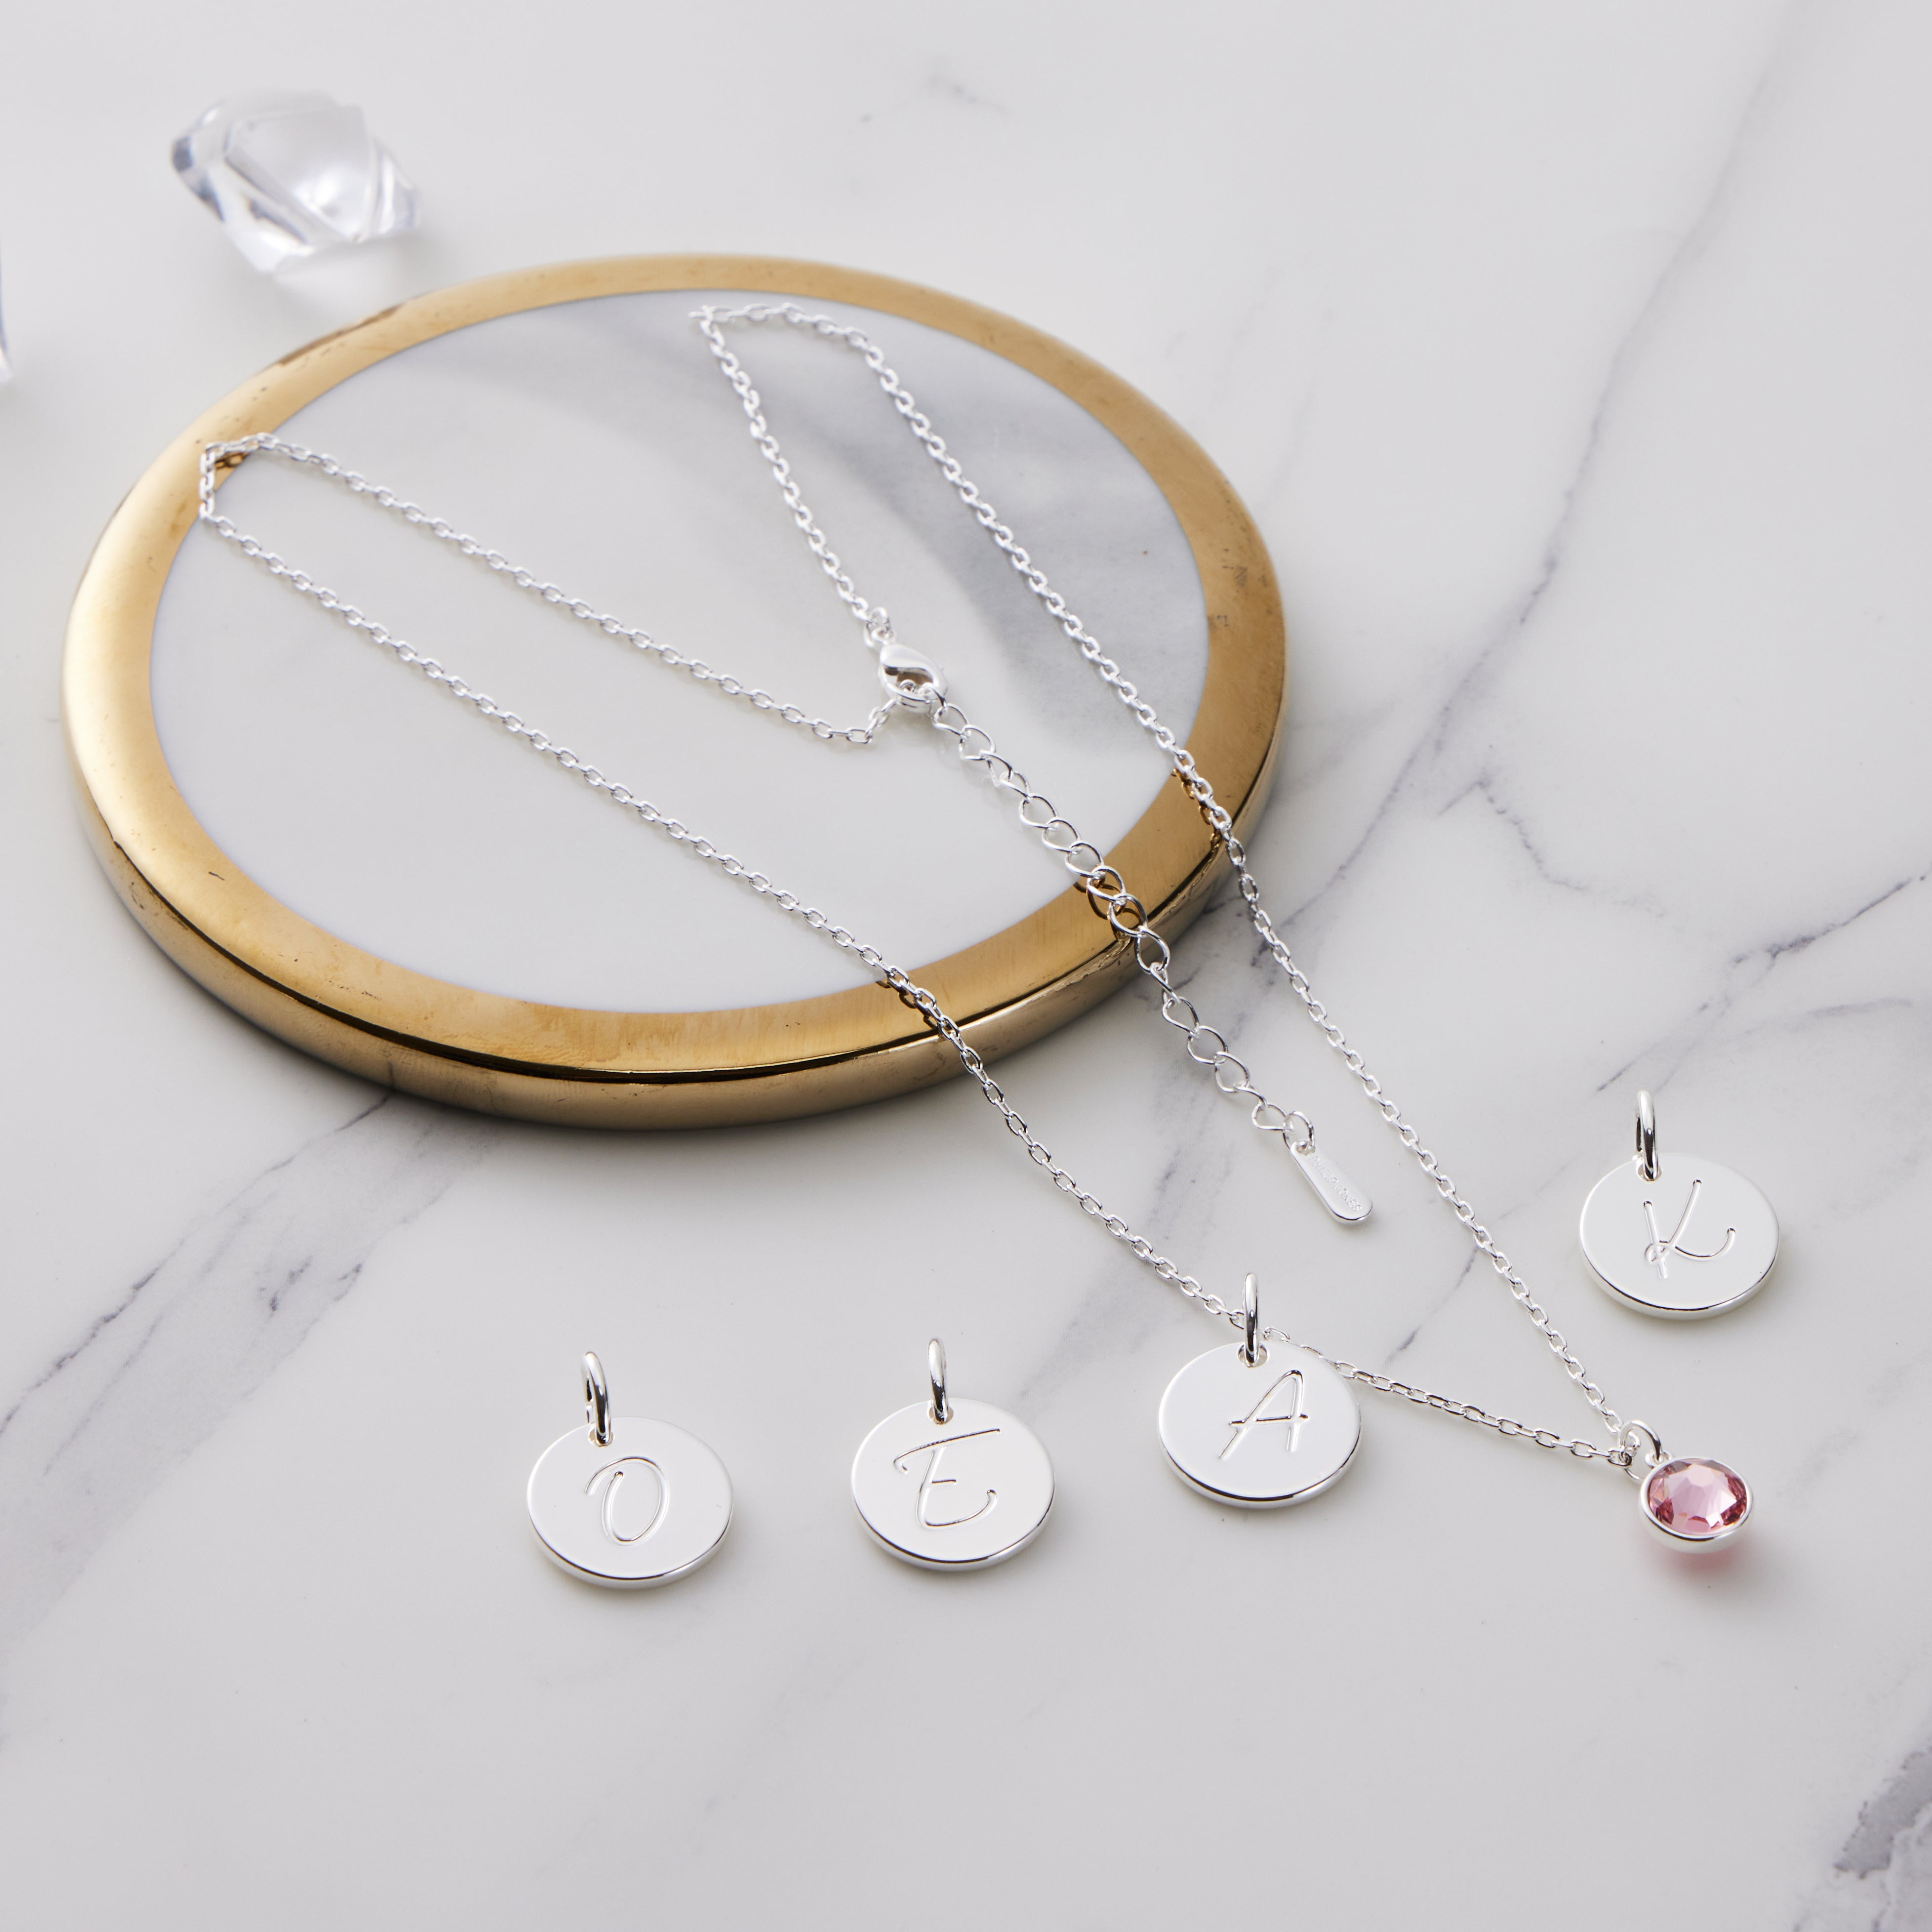 October Initial Birthstone Necklace Created with Zircondia® Crystals